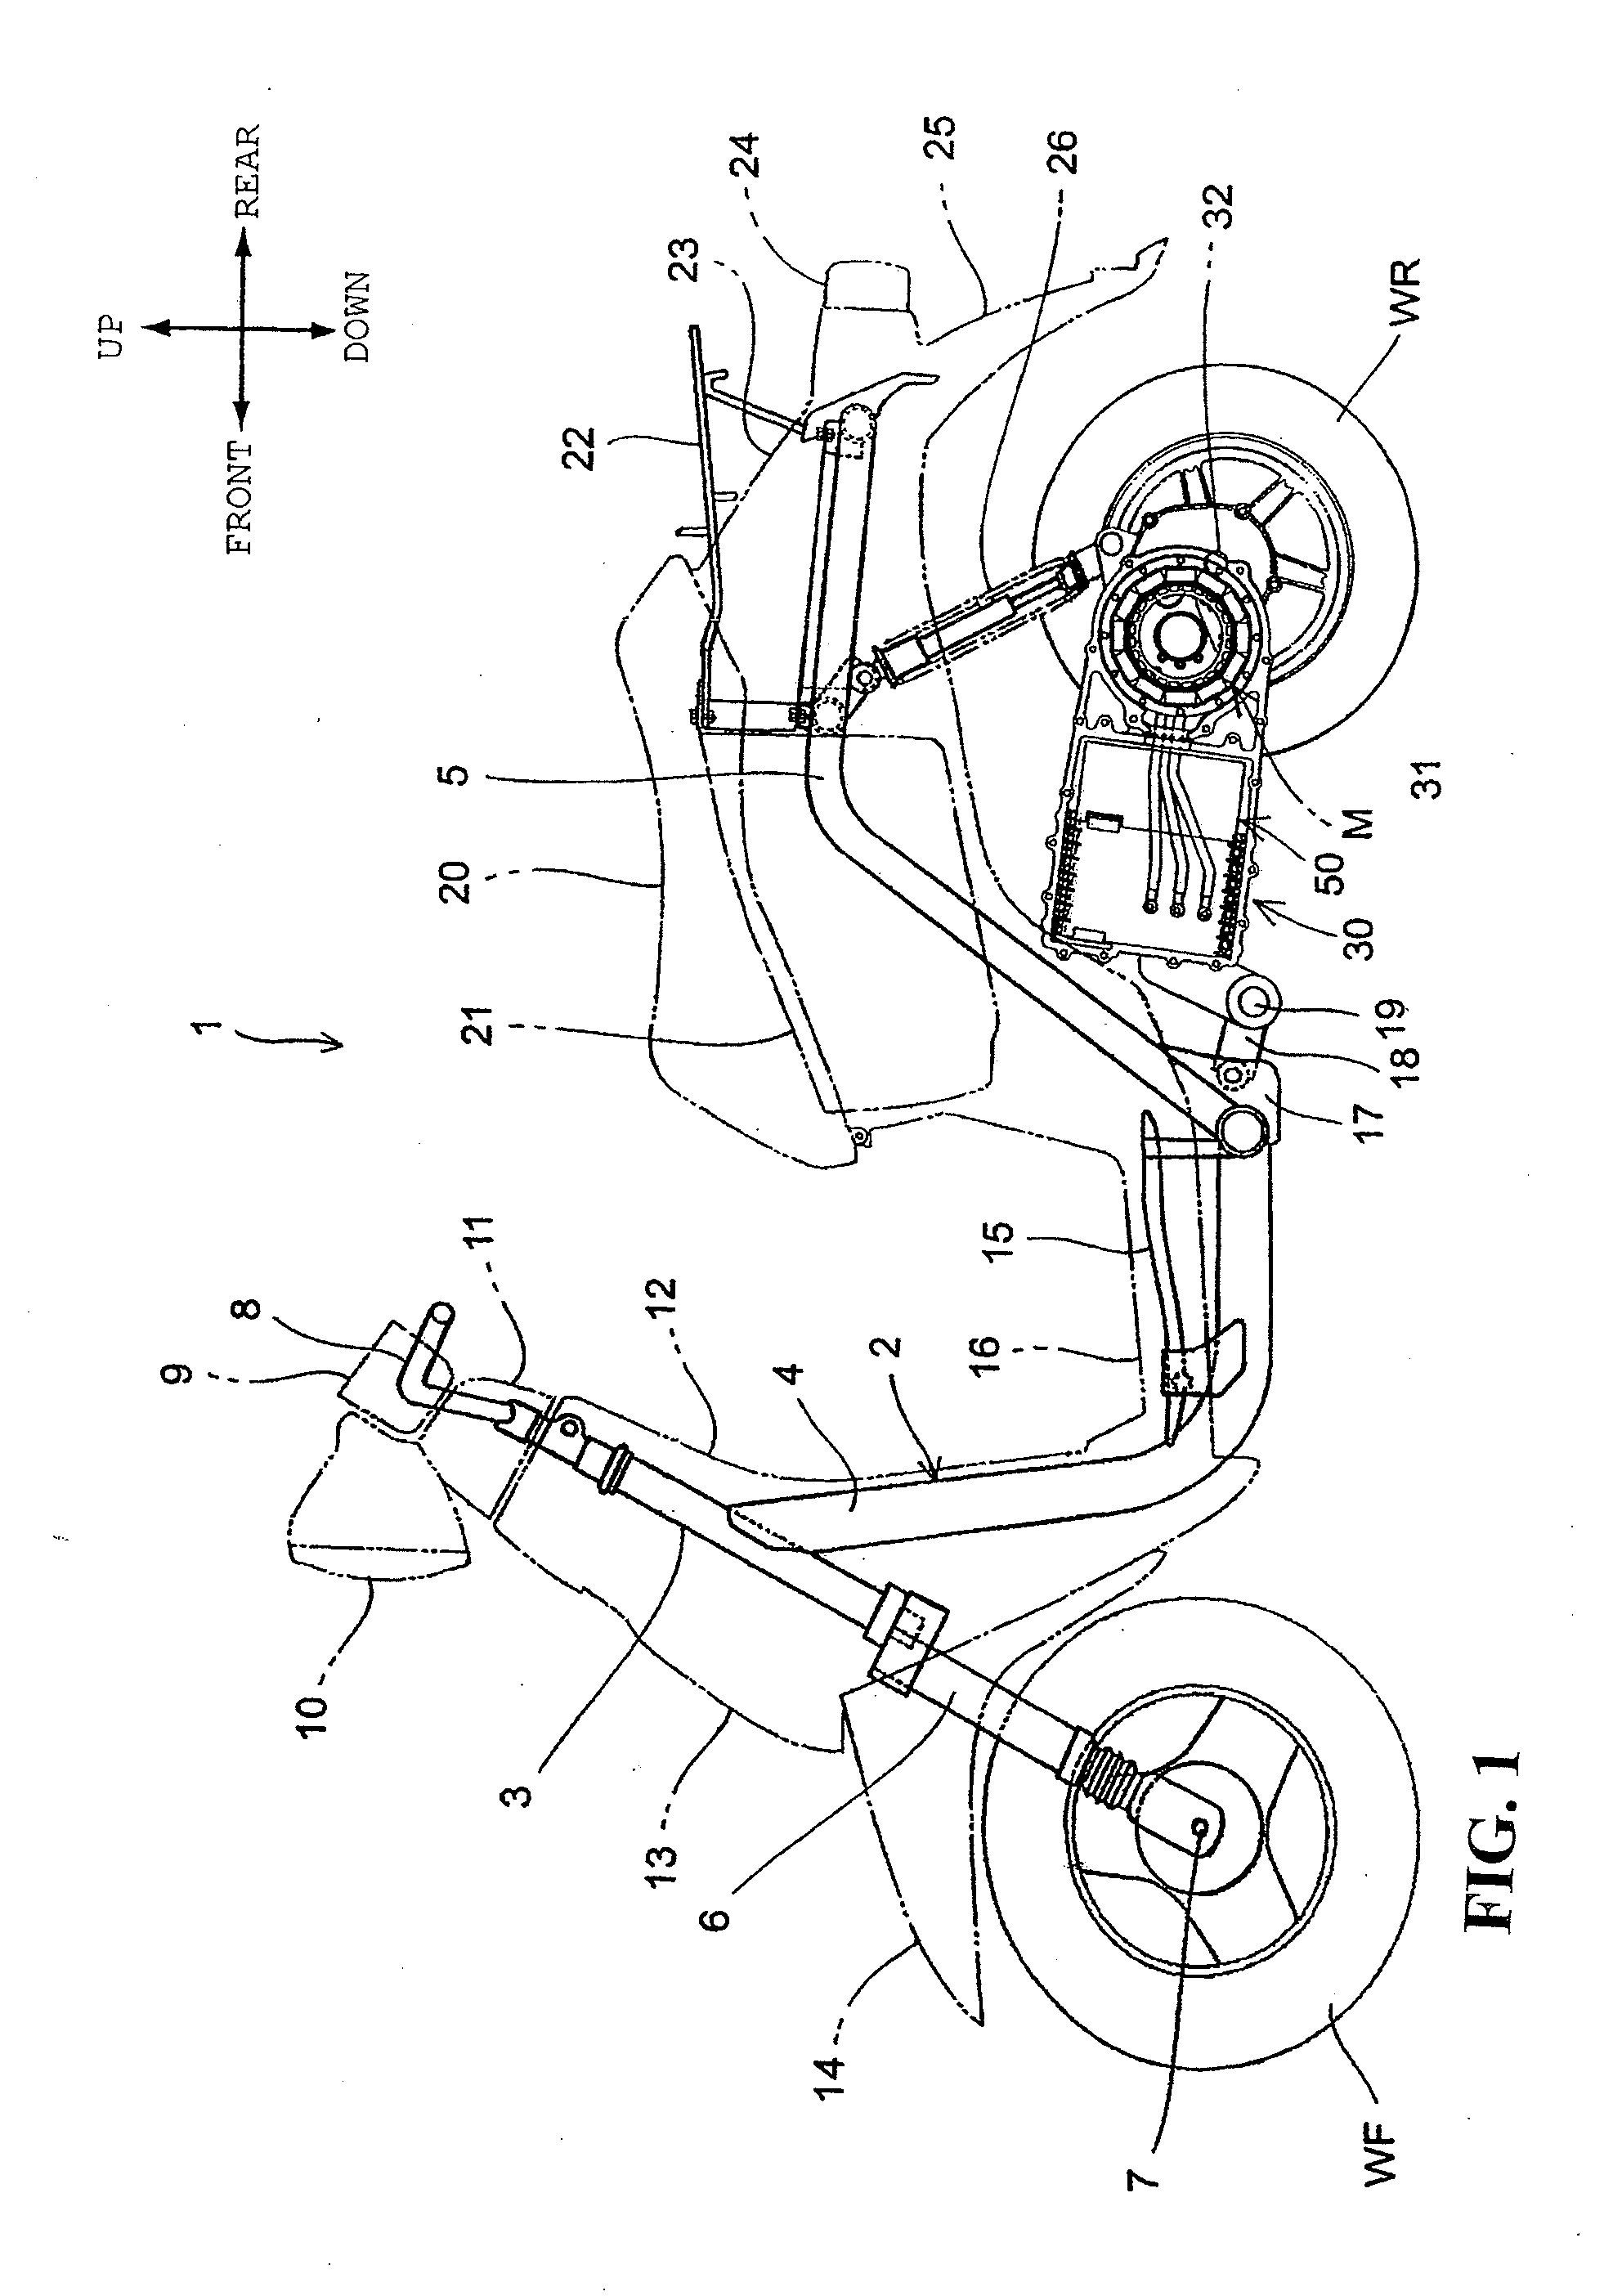 Battery module mounting structure for motor-driven two-wheeled vehicle